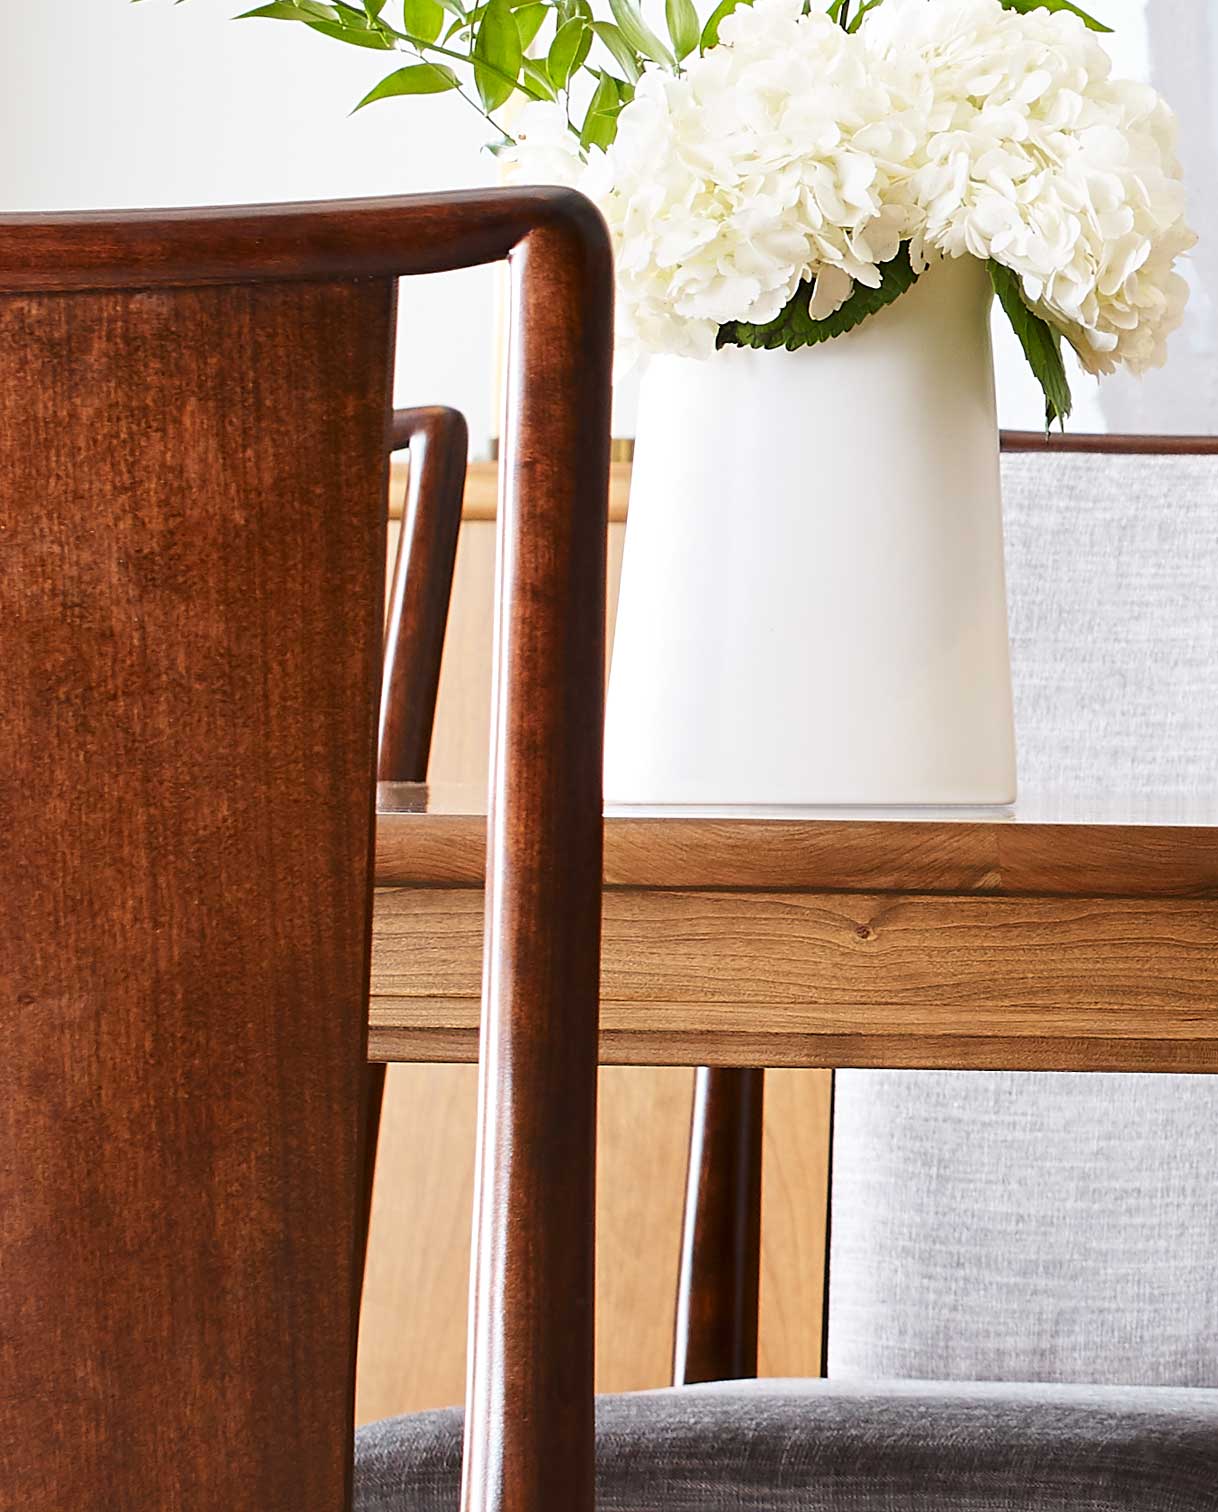 A close-up of a Martine Chair and Dining Table showing the Coventry finish